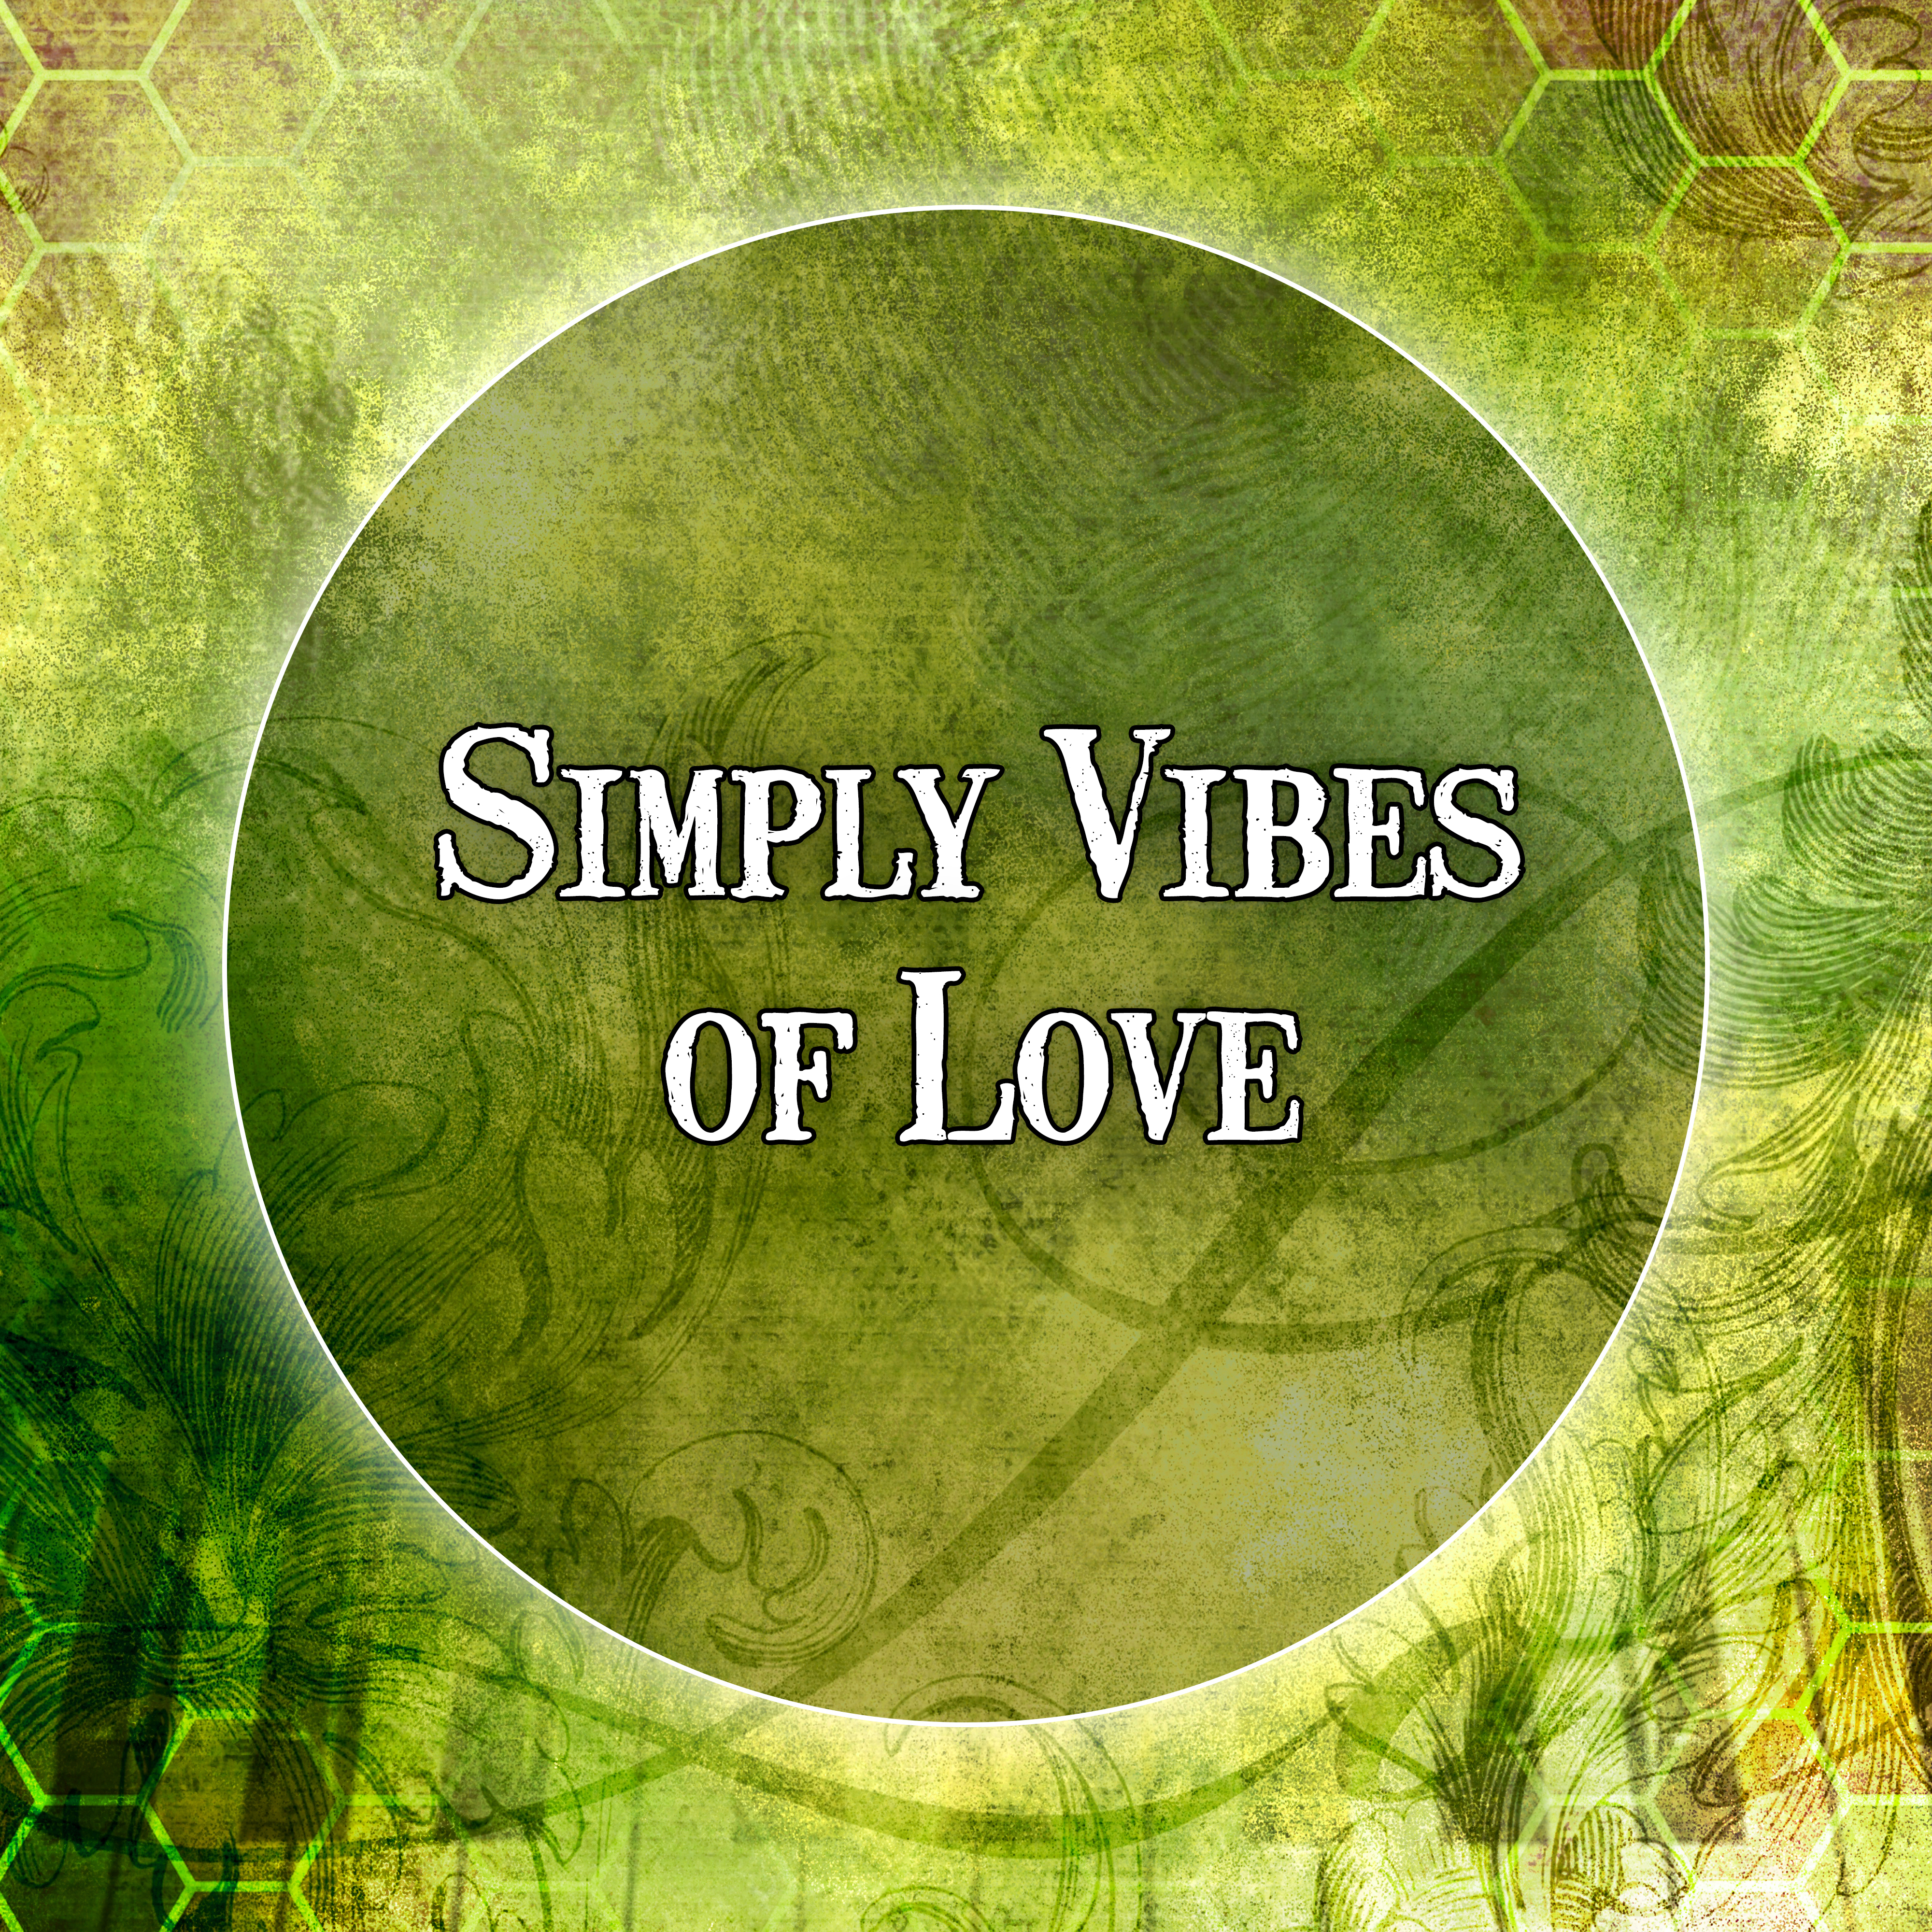 Simply Vibes of Love – Romantic and Sensual Sounds, Simply Vibes of Jazz Music for Lovers, Most Streaming Sounds